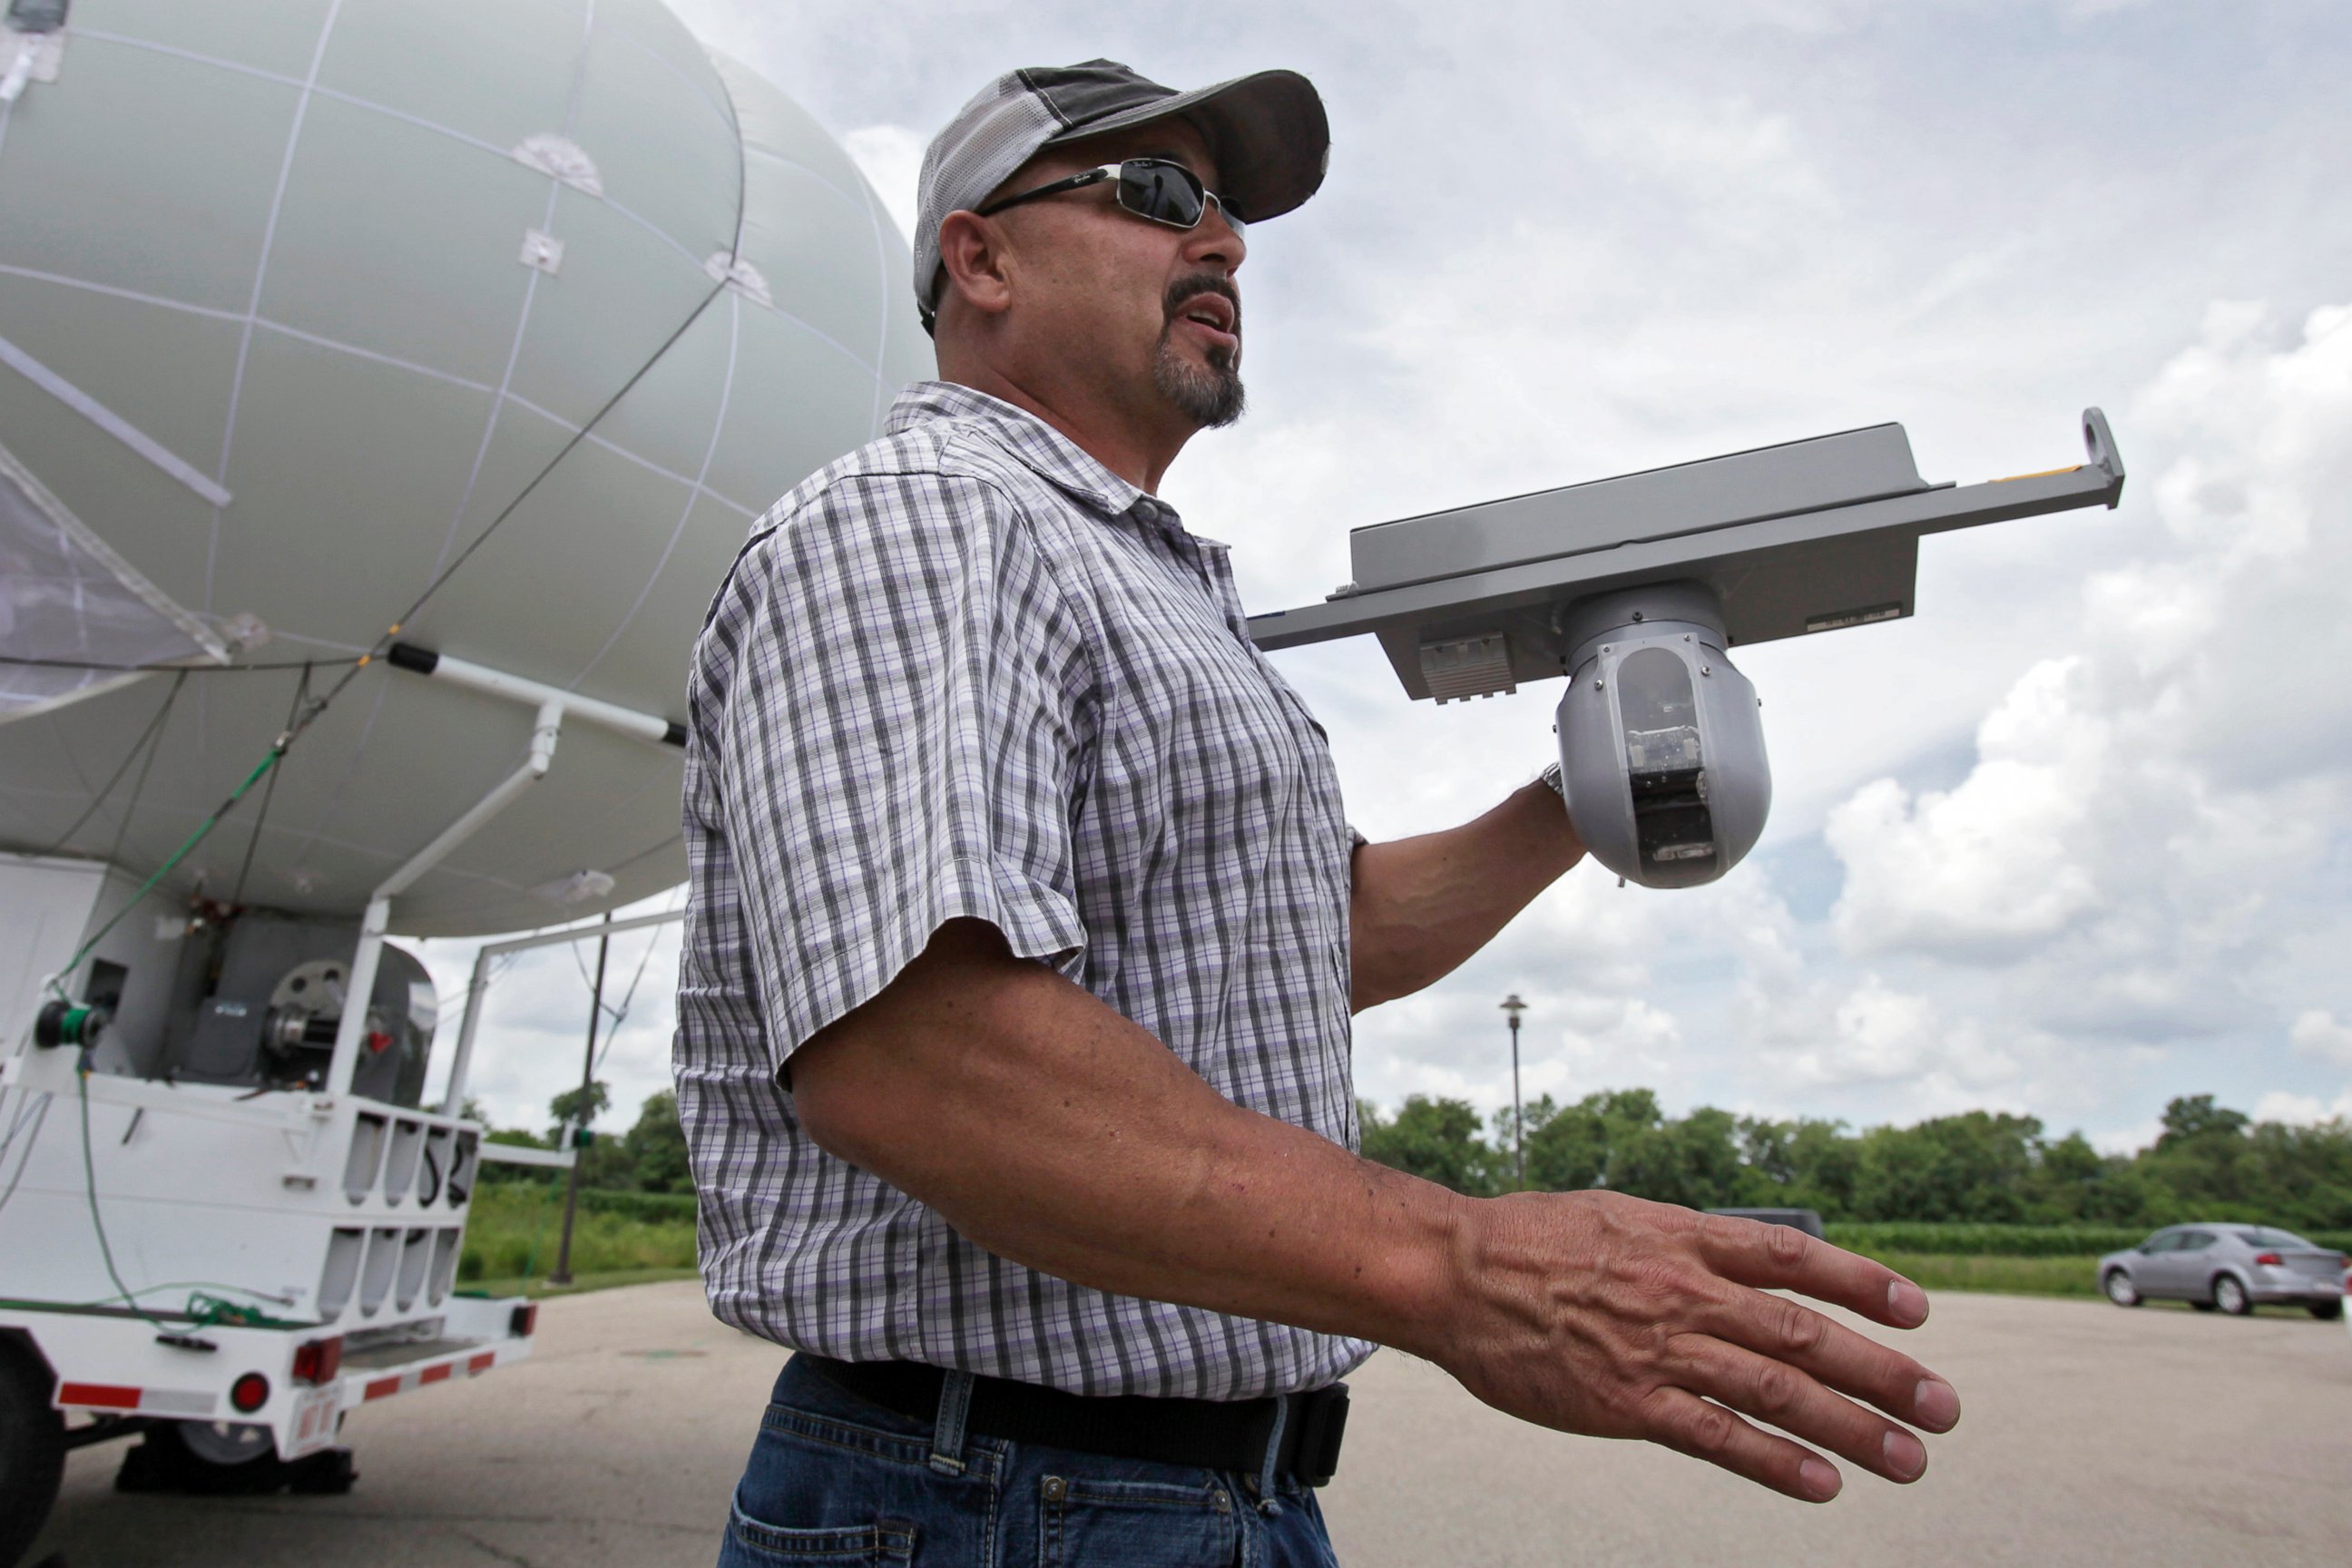 PHOTO: In this June 26, 2014 photo, Rob King shows off the sensor that attaches to the bottom of a surveillance blimp, a large helium balloon that has cameras attached, at Ohio/Indiana Unmanned Aircraft Systems Center in Clintonville, Ohio. 